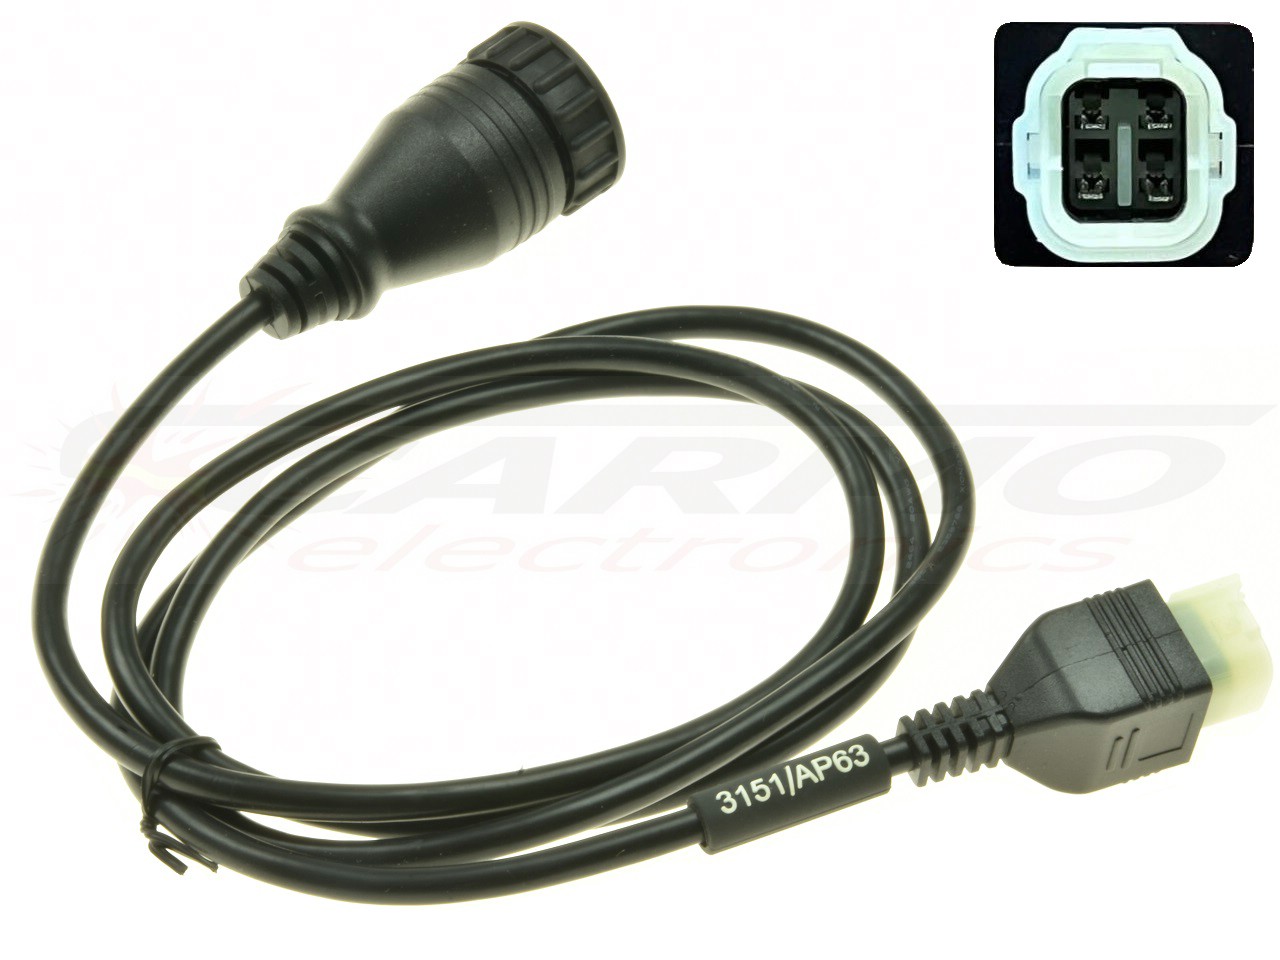 3151/AP63 Motorcycle KYMCO QUAD diagnostic cable TEXA-3911967 - Click Image to Close